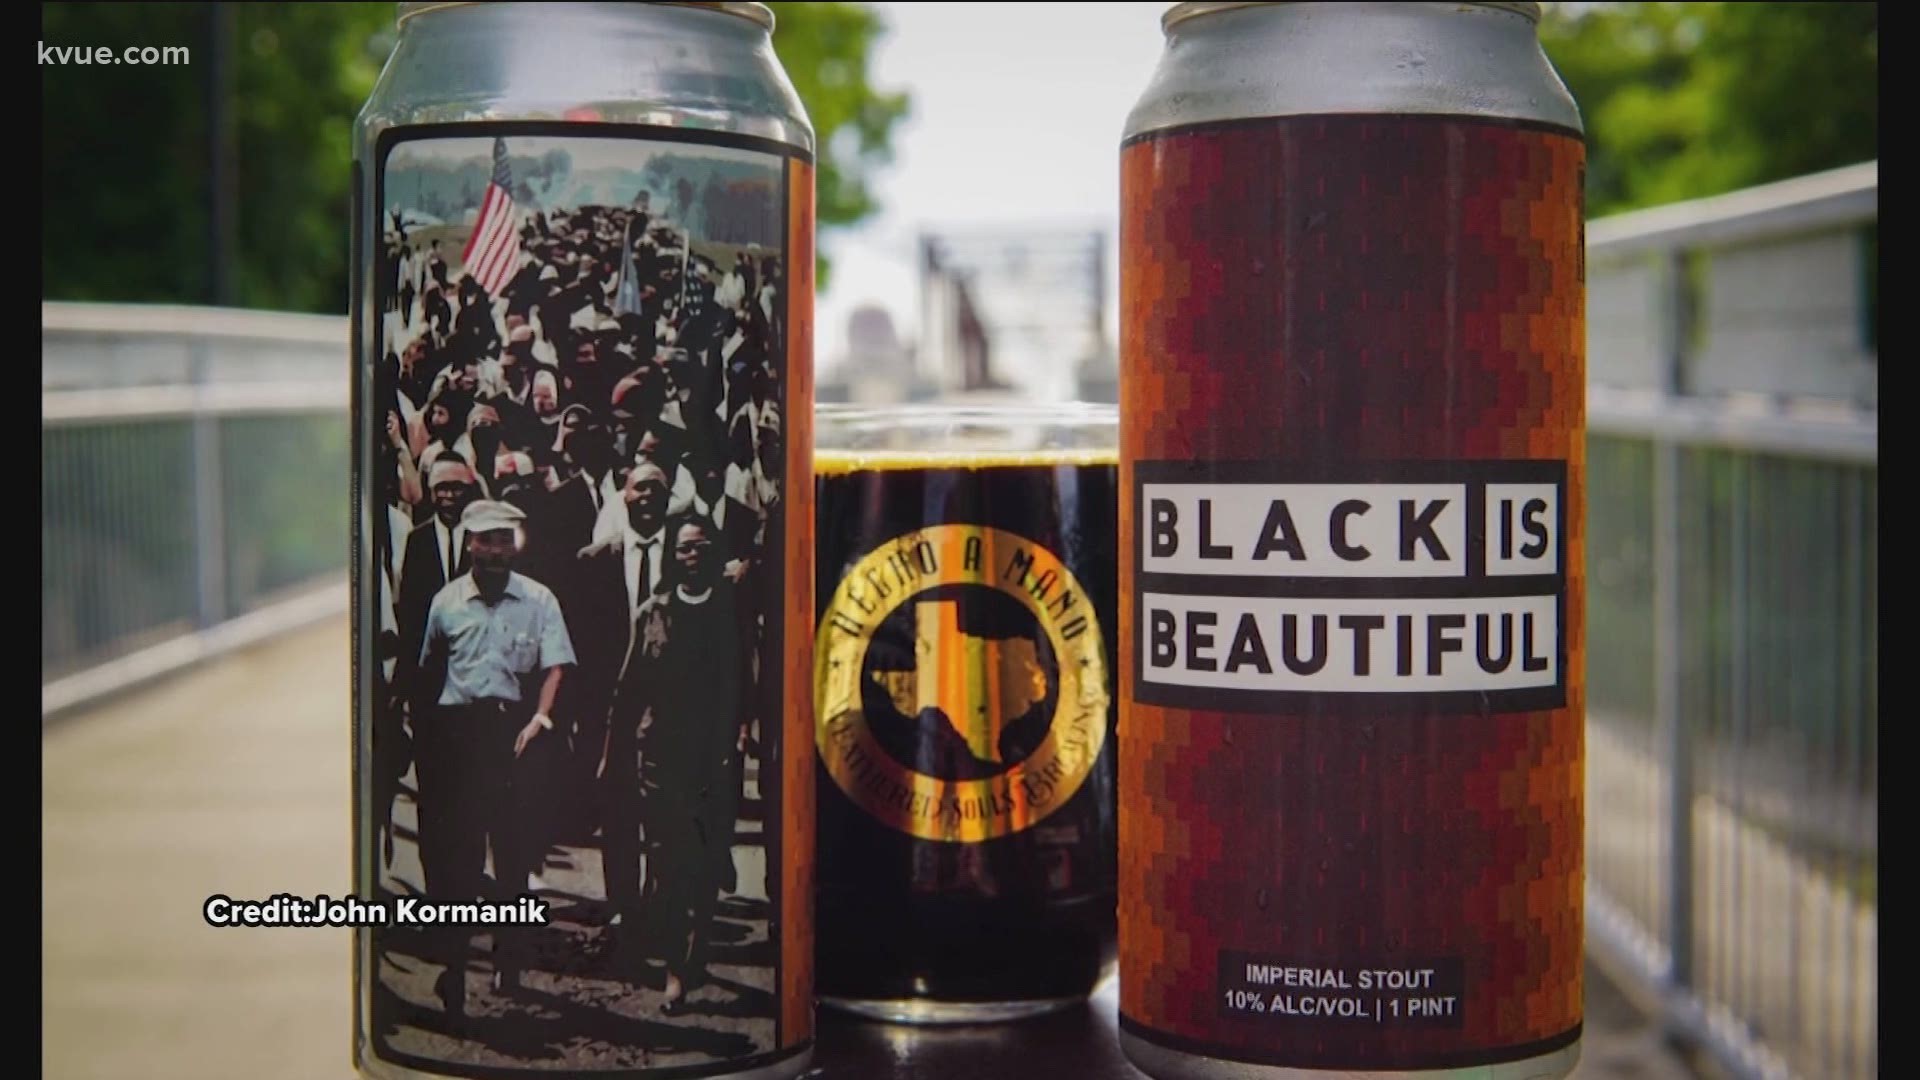 Austin-area breweries are using beer to help fight injustice.